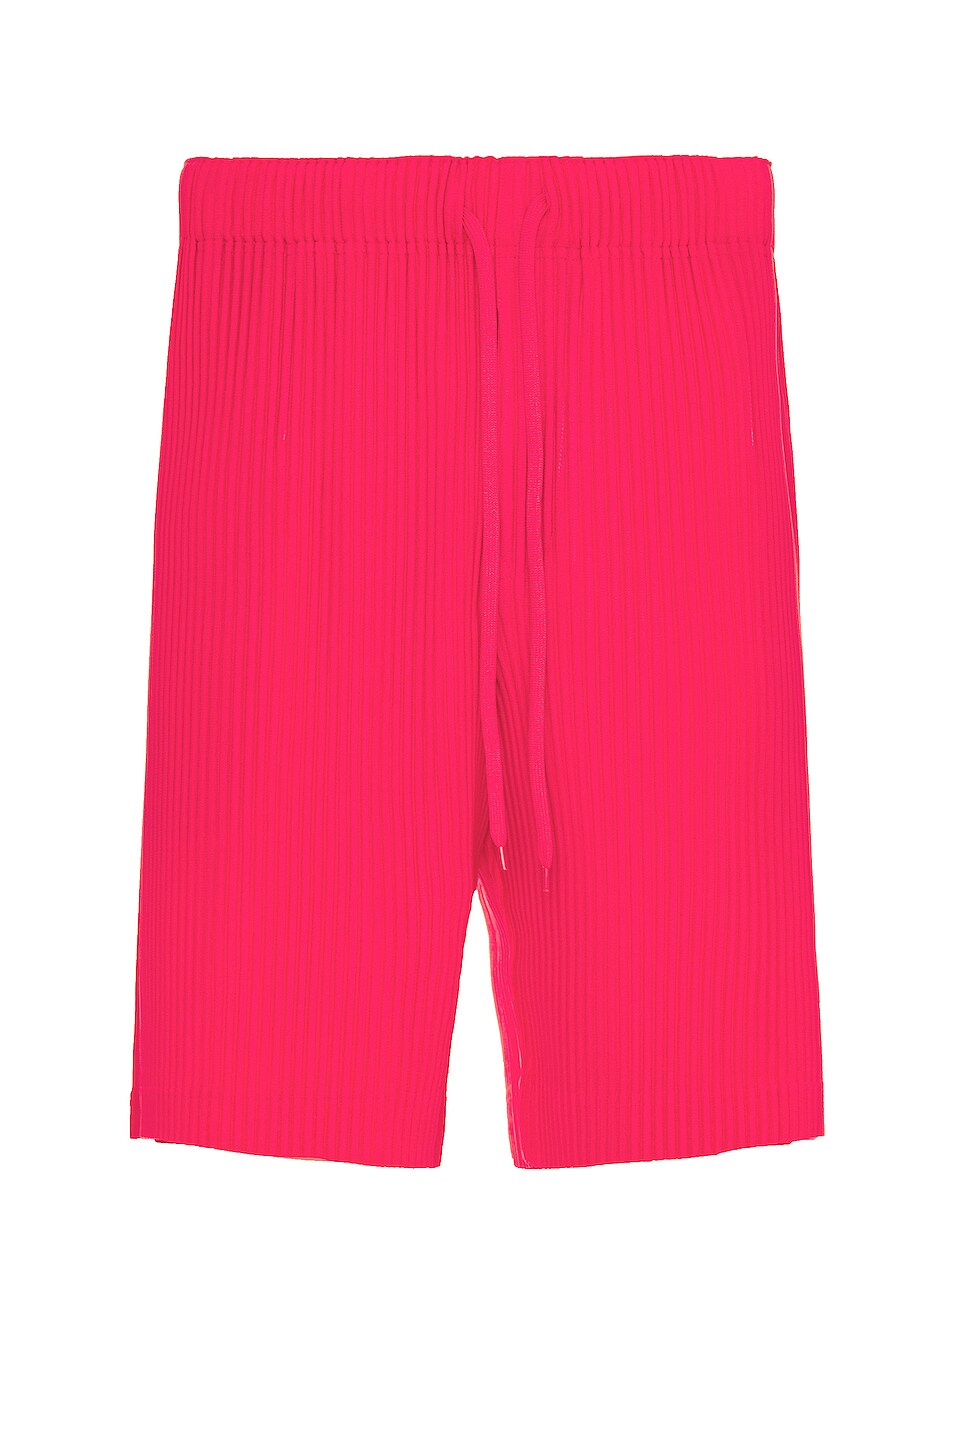 Image 1 of Homme Plisse Issey Miyake Shorts in Shock Red